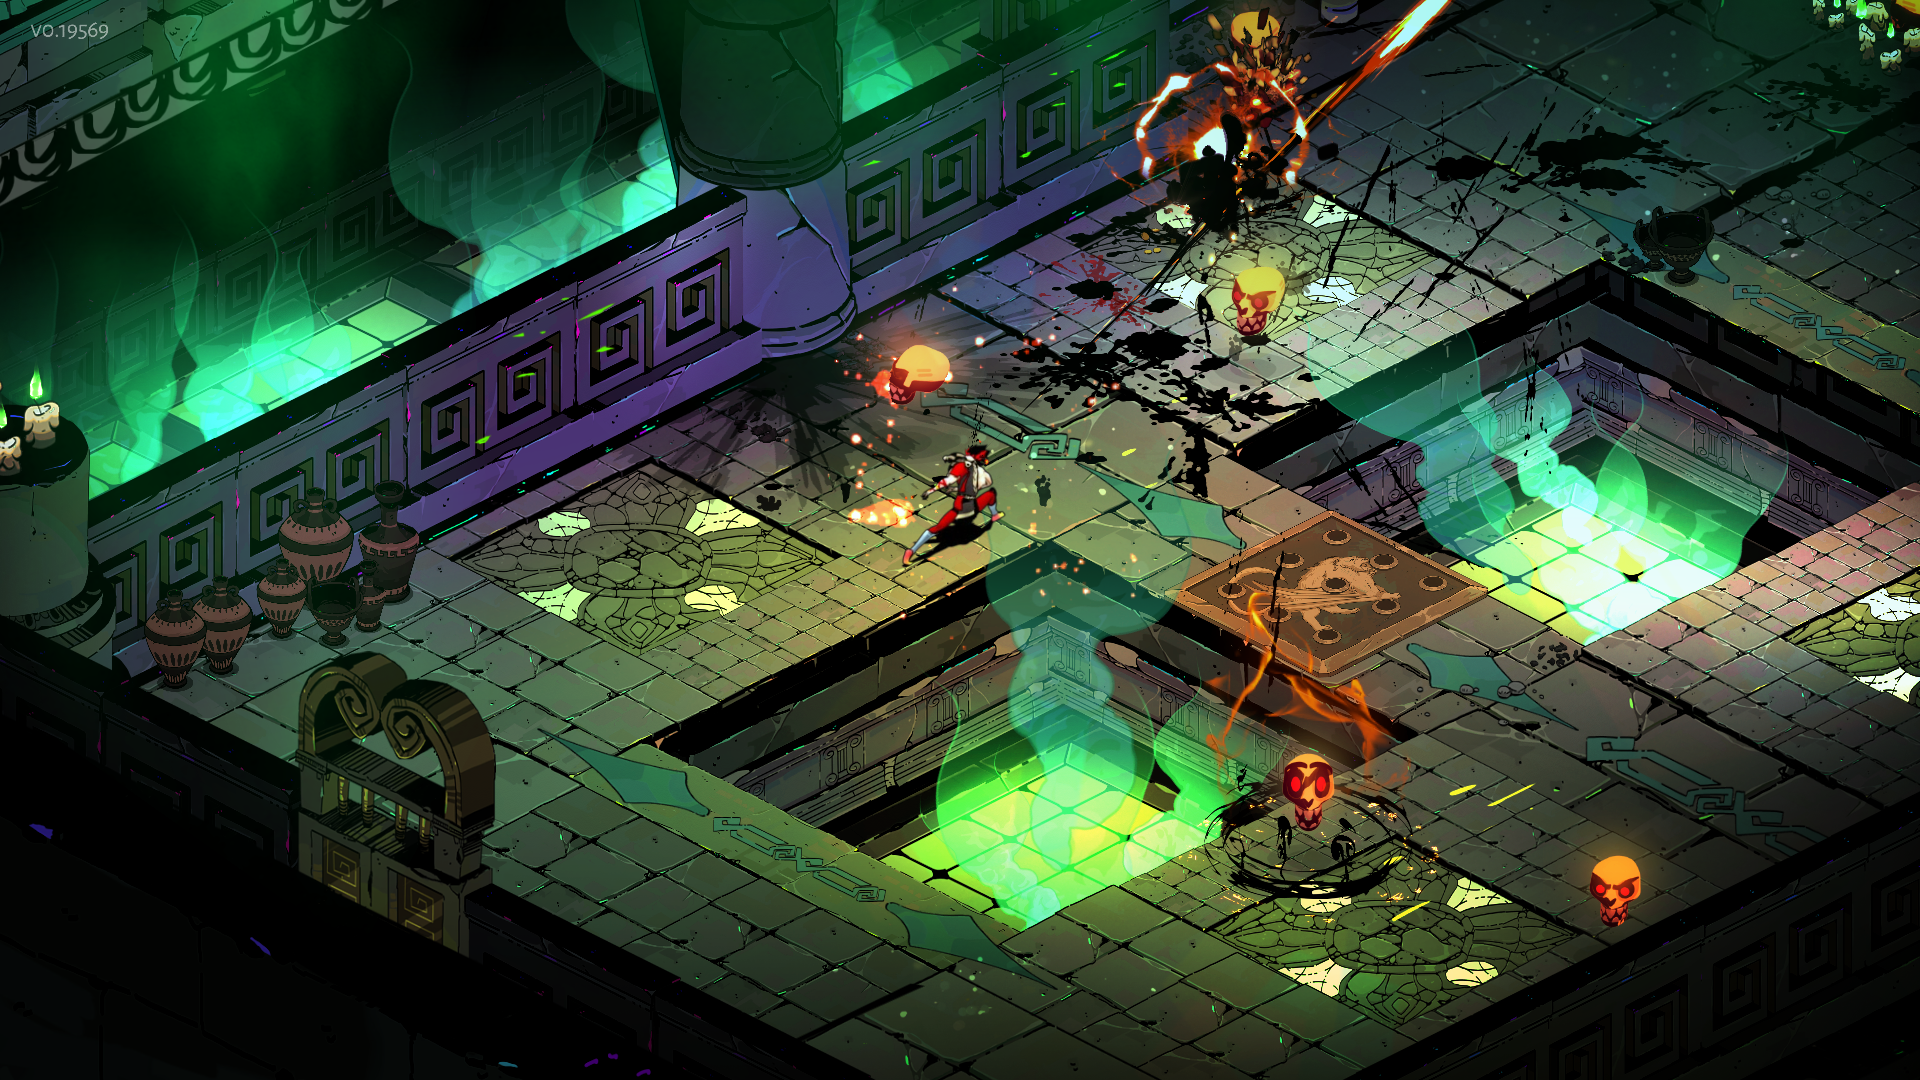 Prince Zagreus fights his way out of the underworld in Hades, one of the best roguelike games on PS5